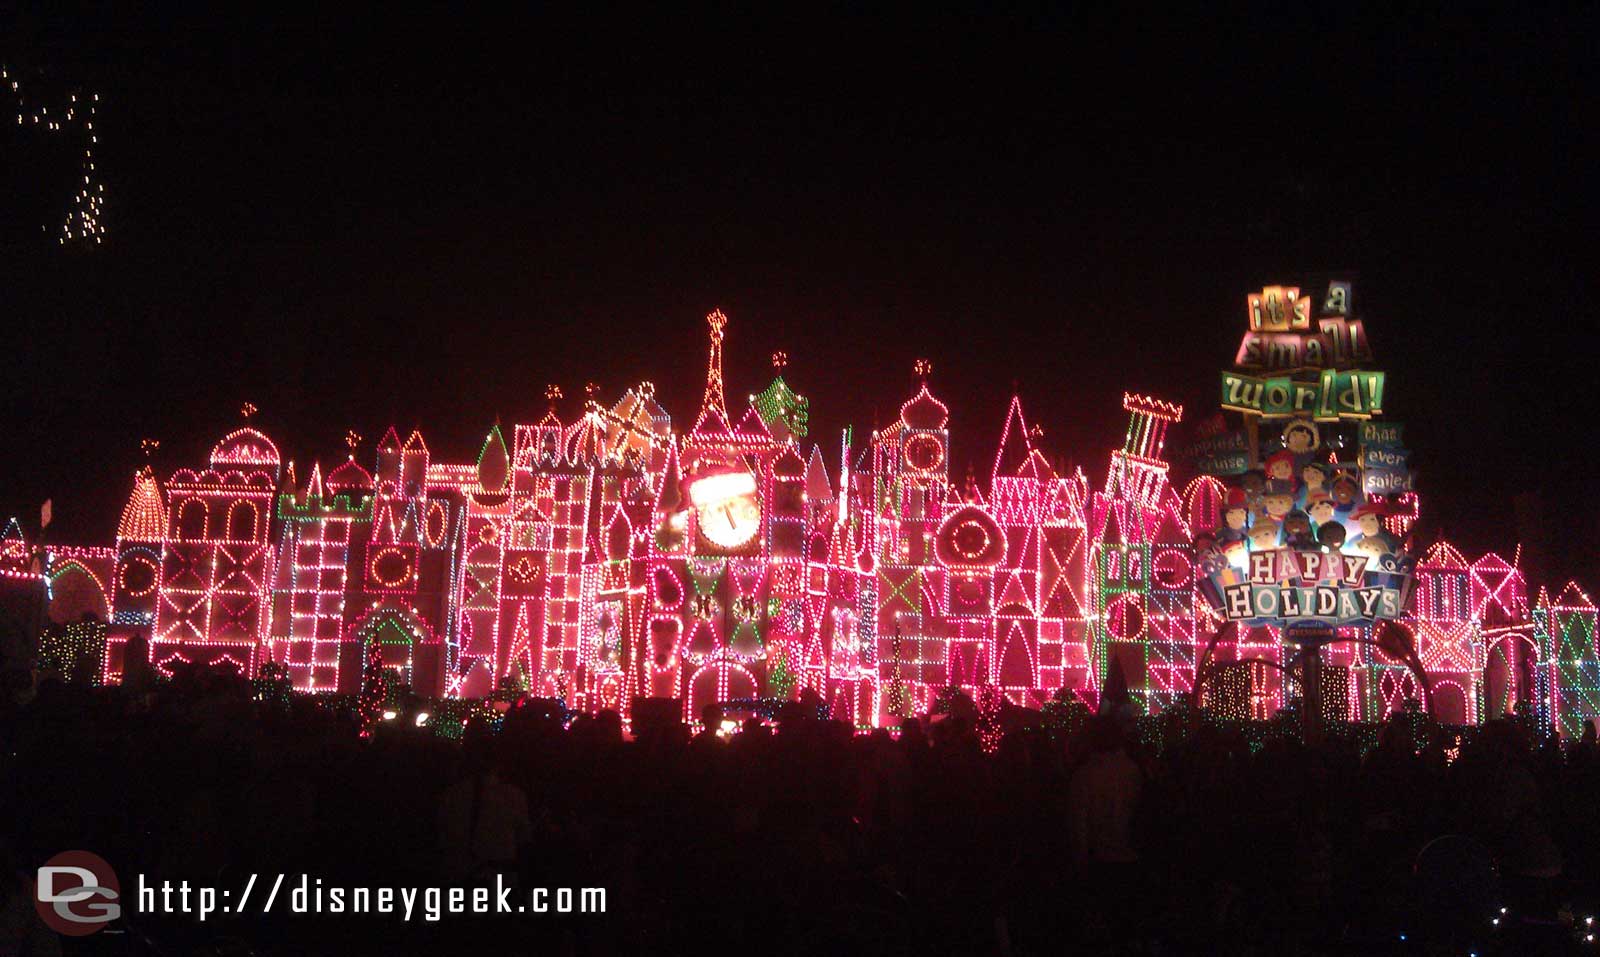 Small World Holiday tonight. Why is the quarter hour projectionlight show so bad this year